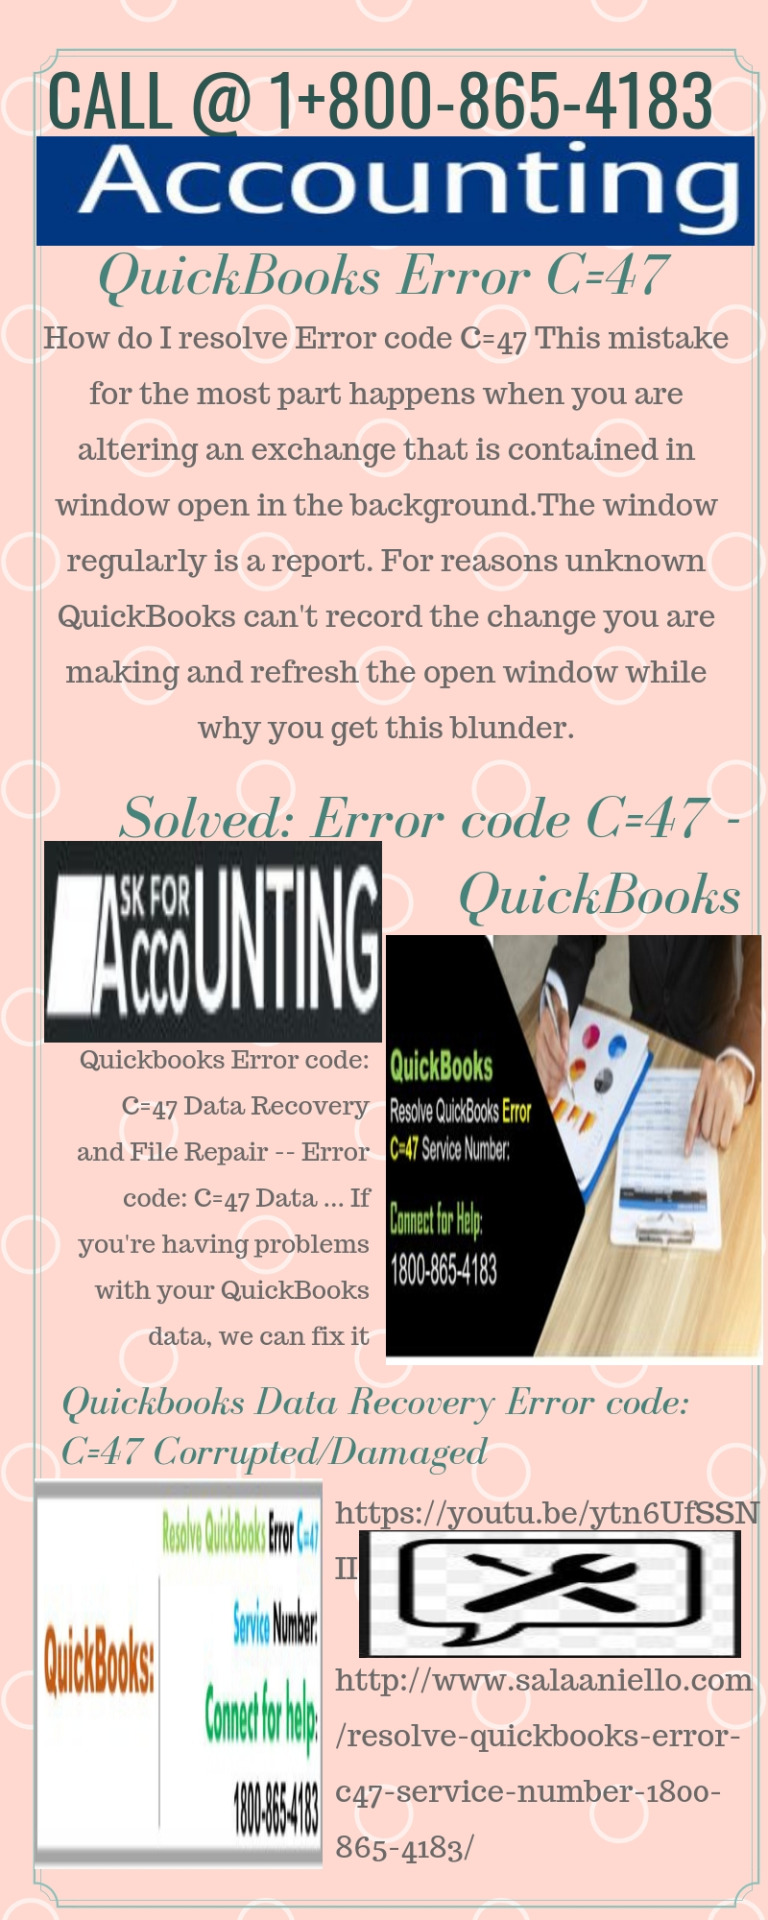 does quickbooks payroll service issue 1099s